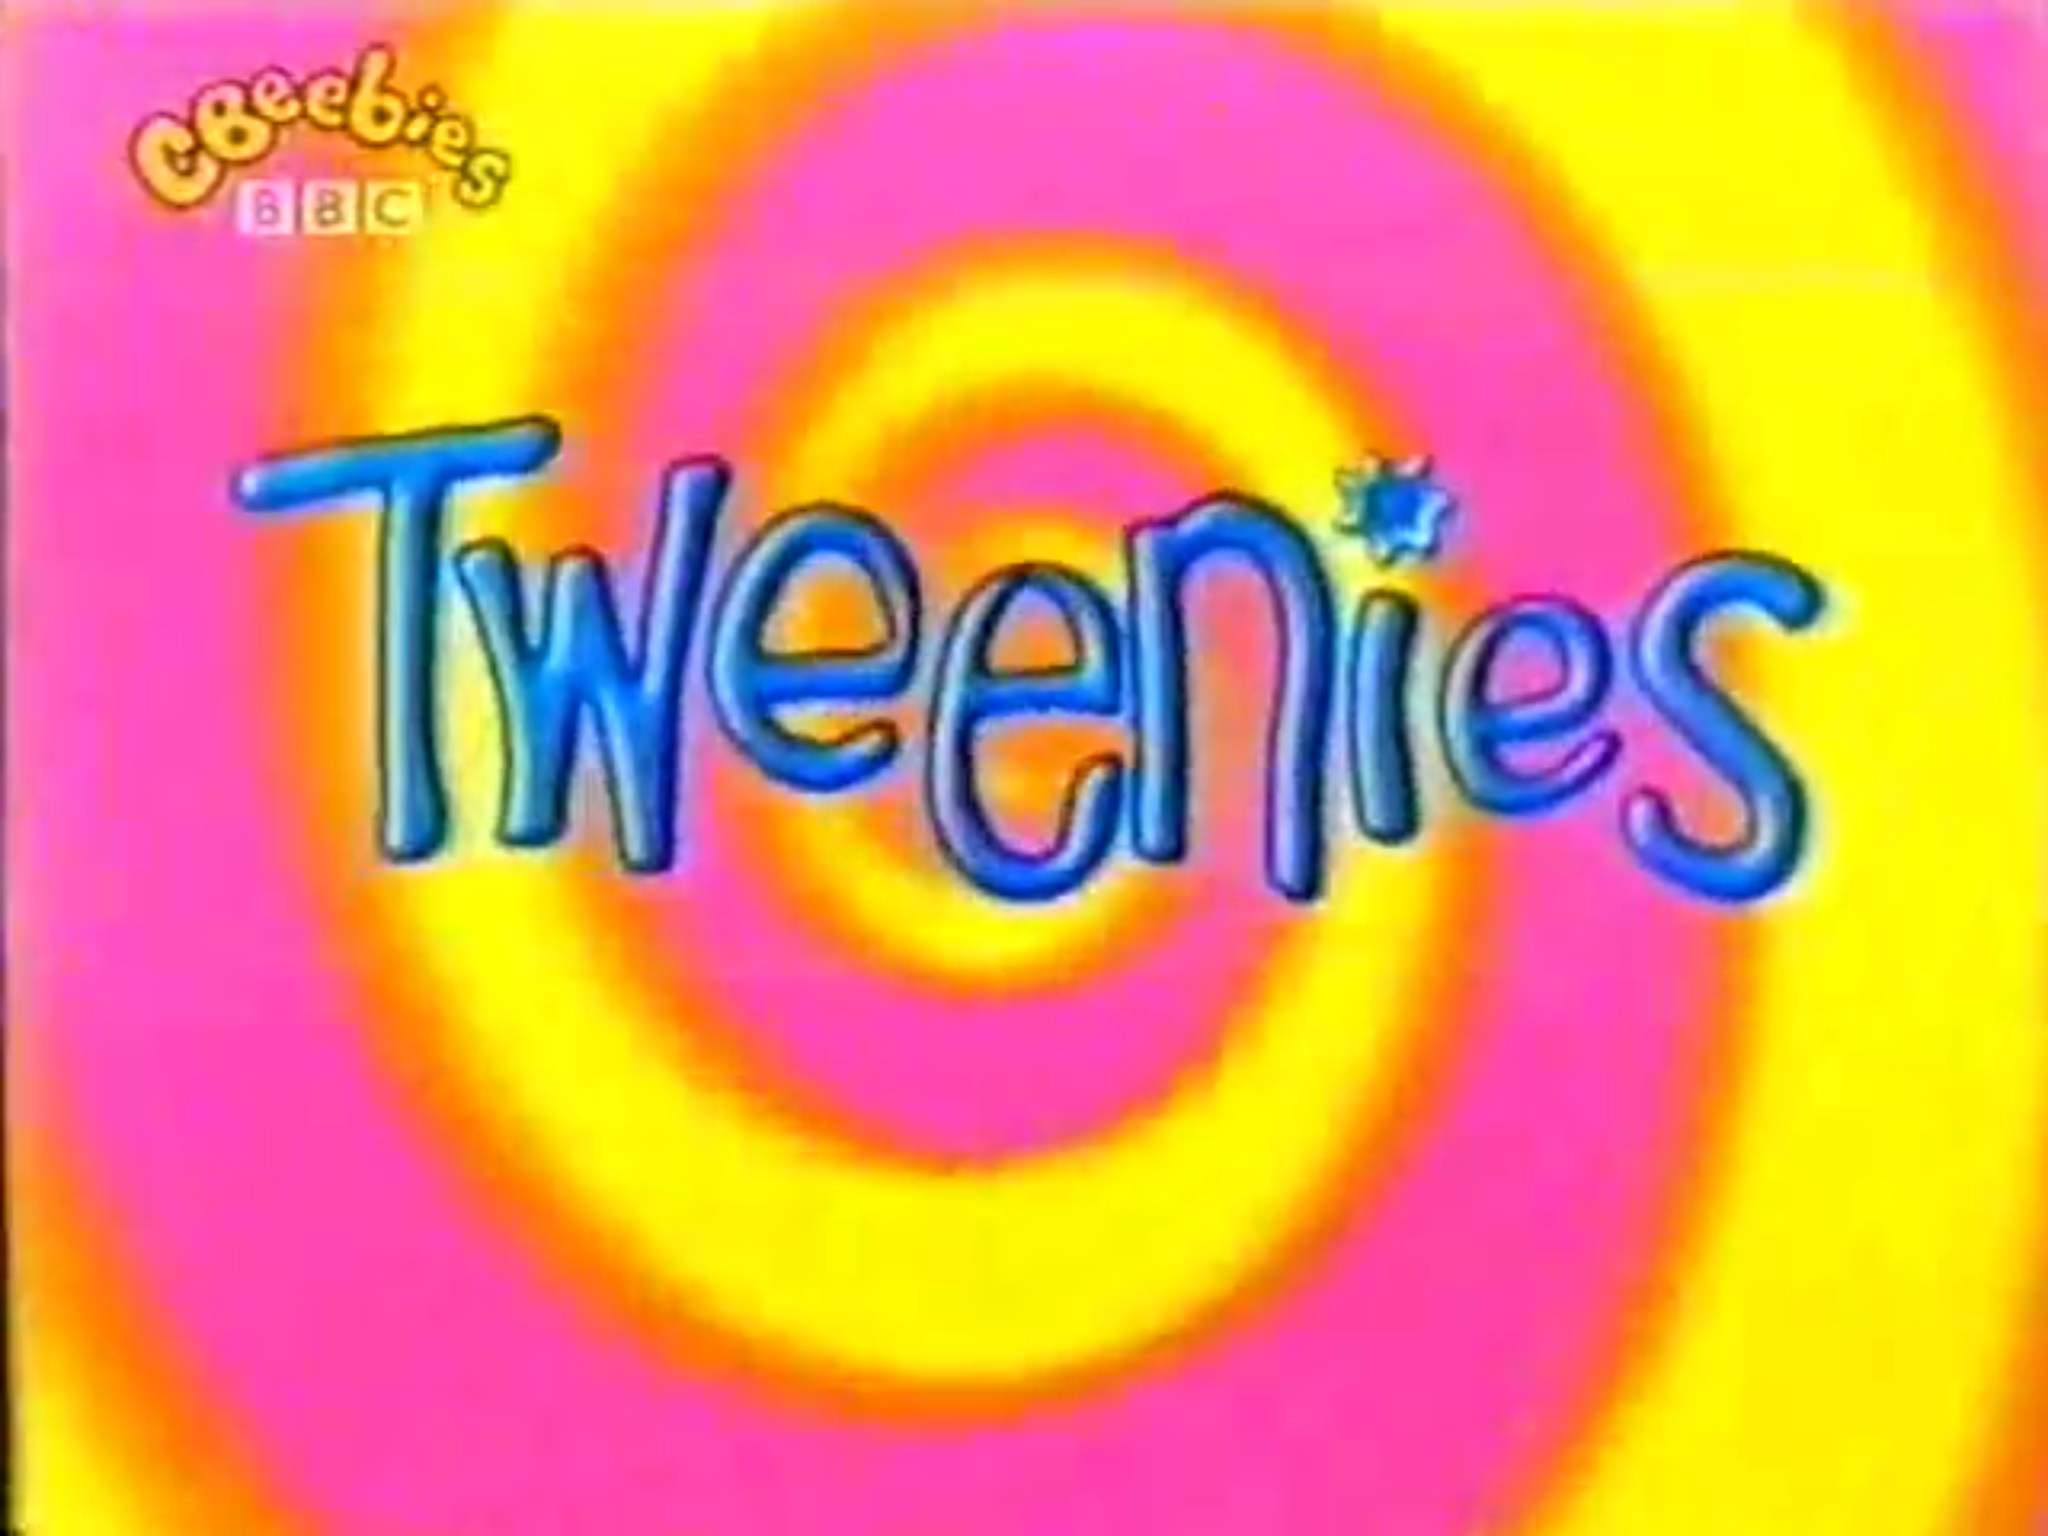 Be Safe With Tweenies "Knives" - Be Safe with the Tweenies "Knives" (found short of British children's TV series; 2000s)